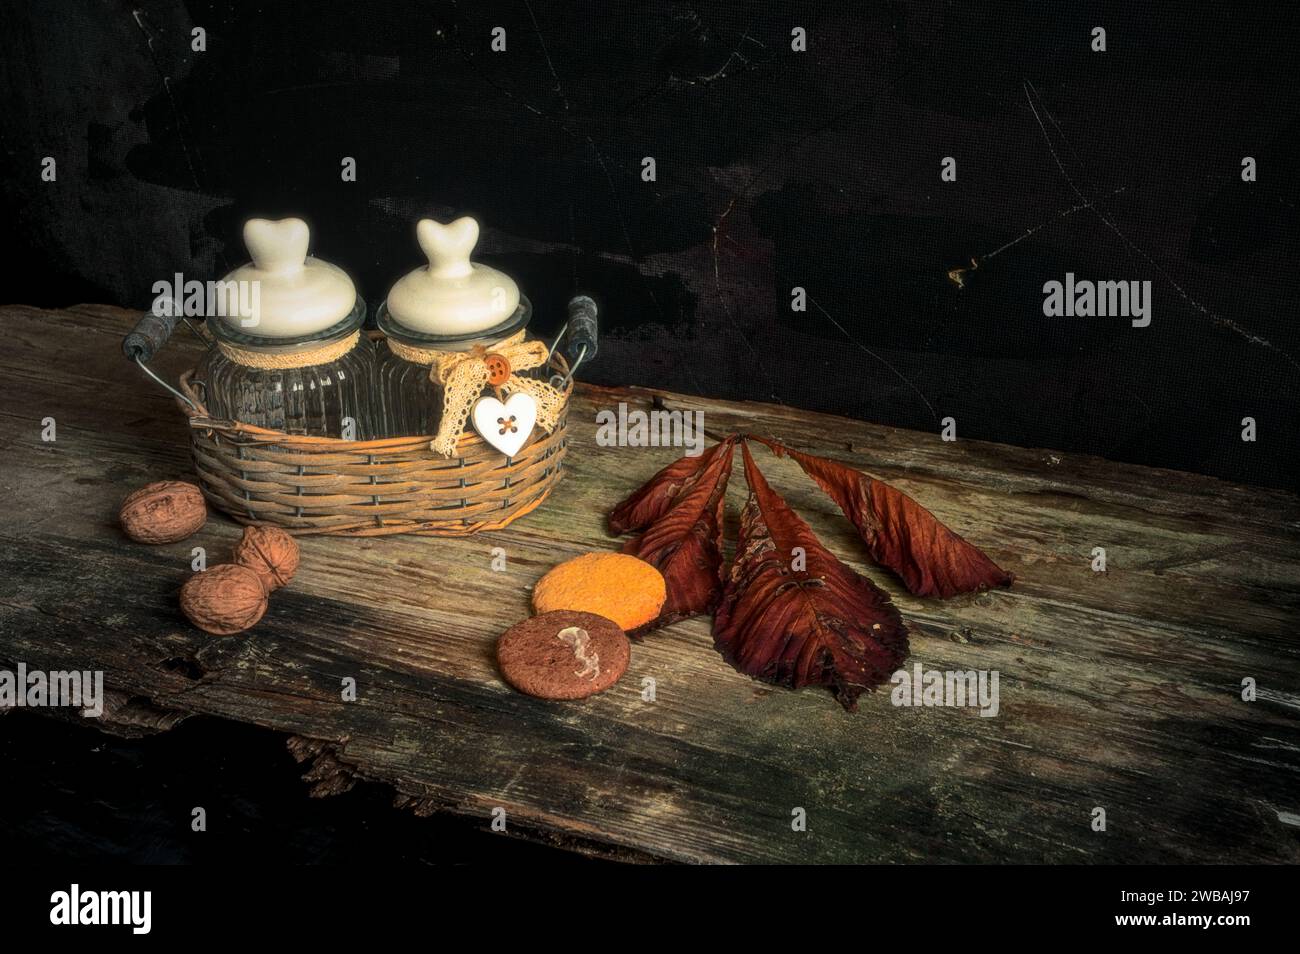 Italian still life warm color bases. Good for kitchen or living room Stock Photo